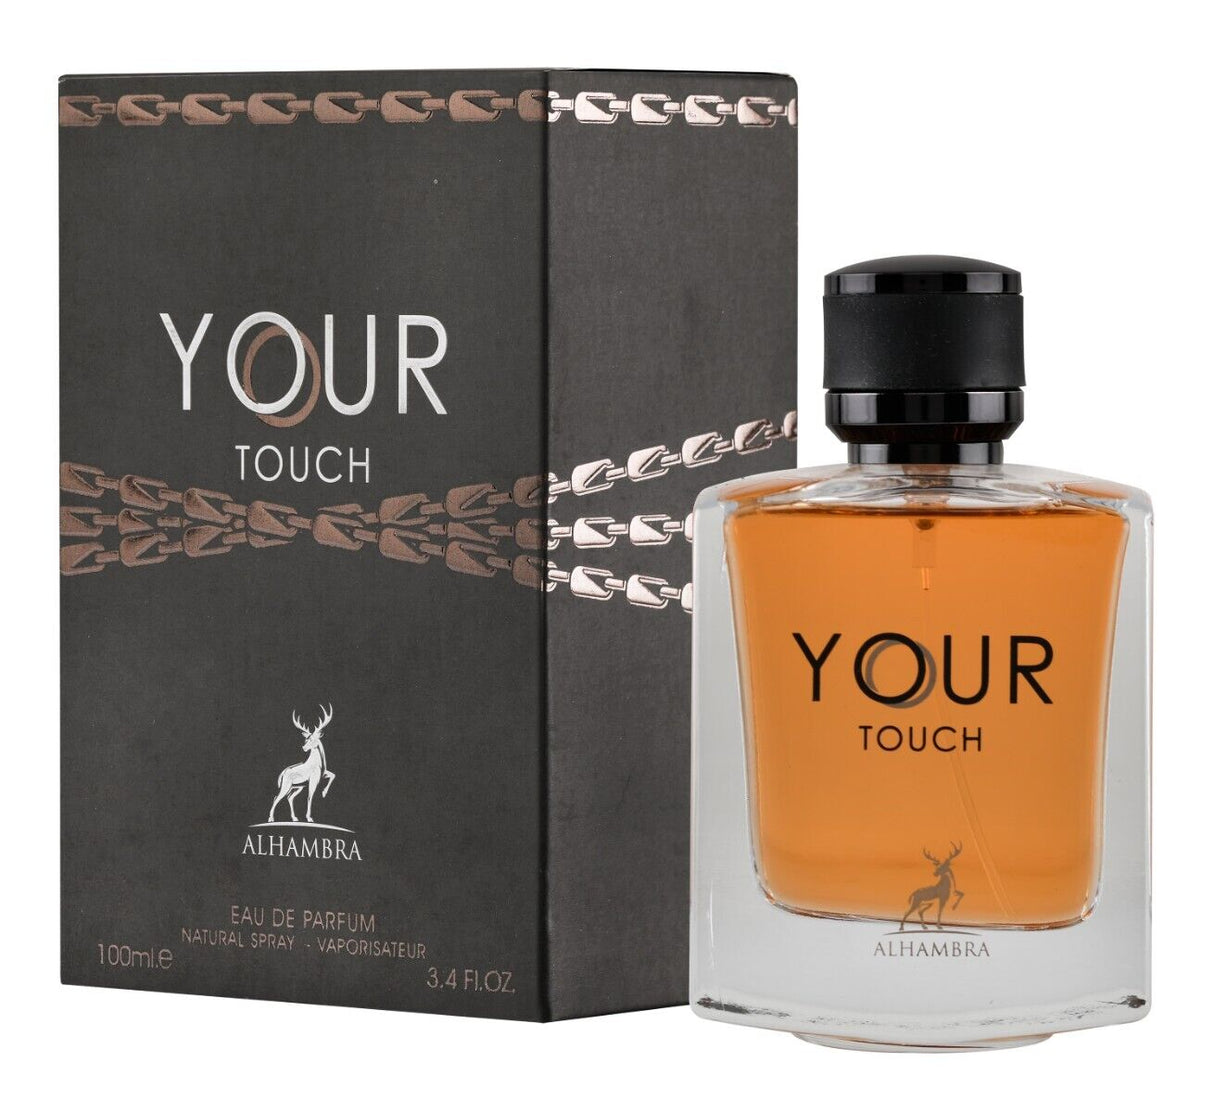 Your Touch 30ml by Maison Alhambra,